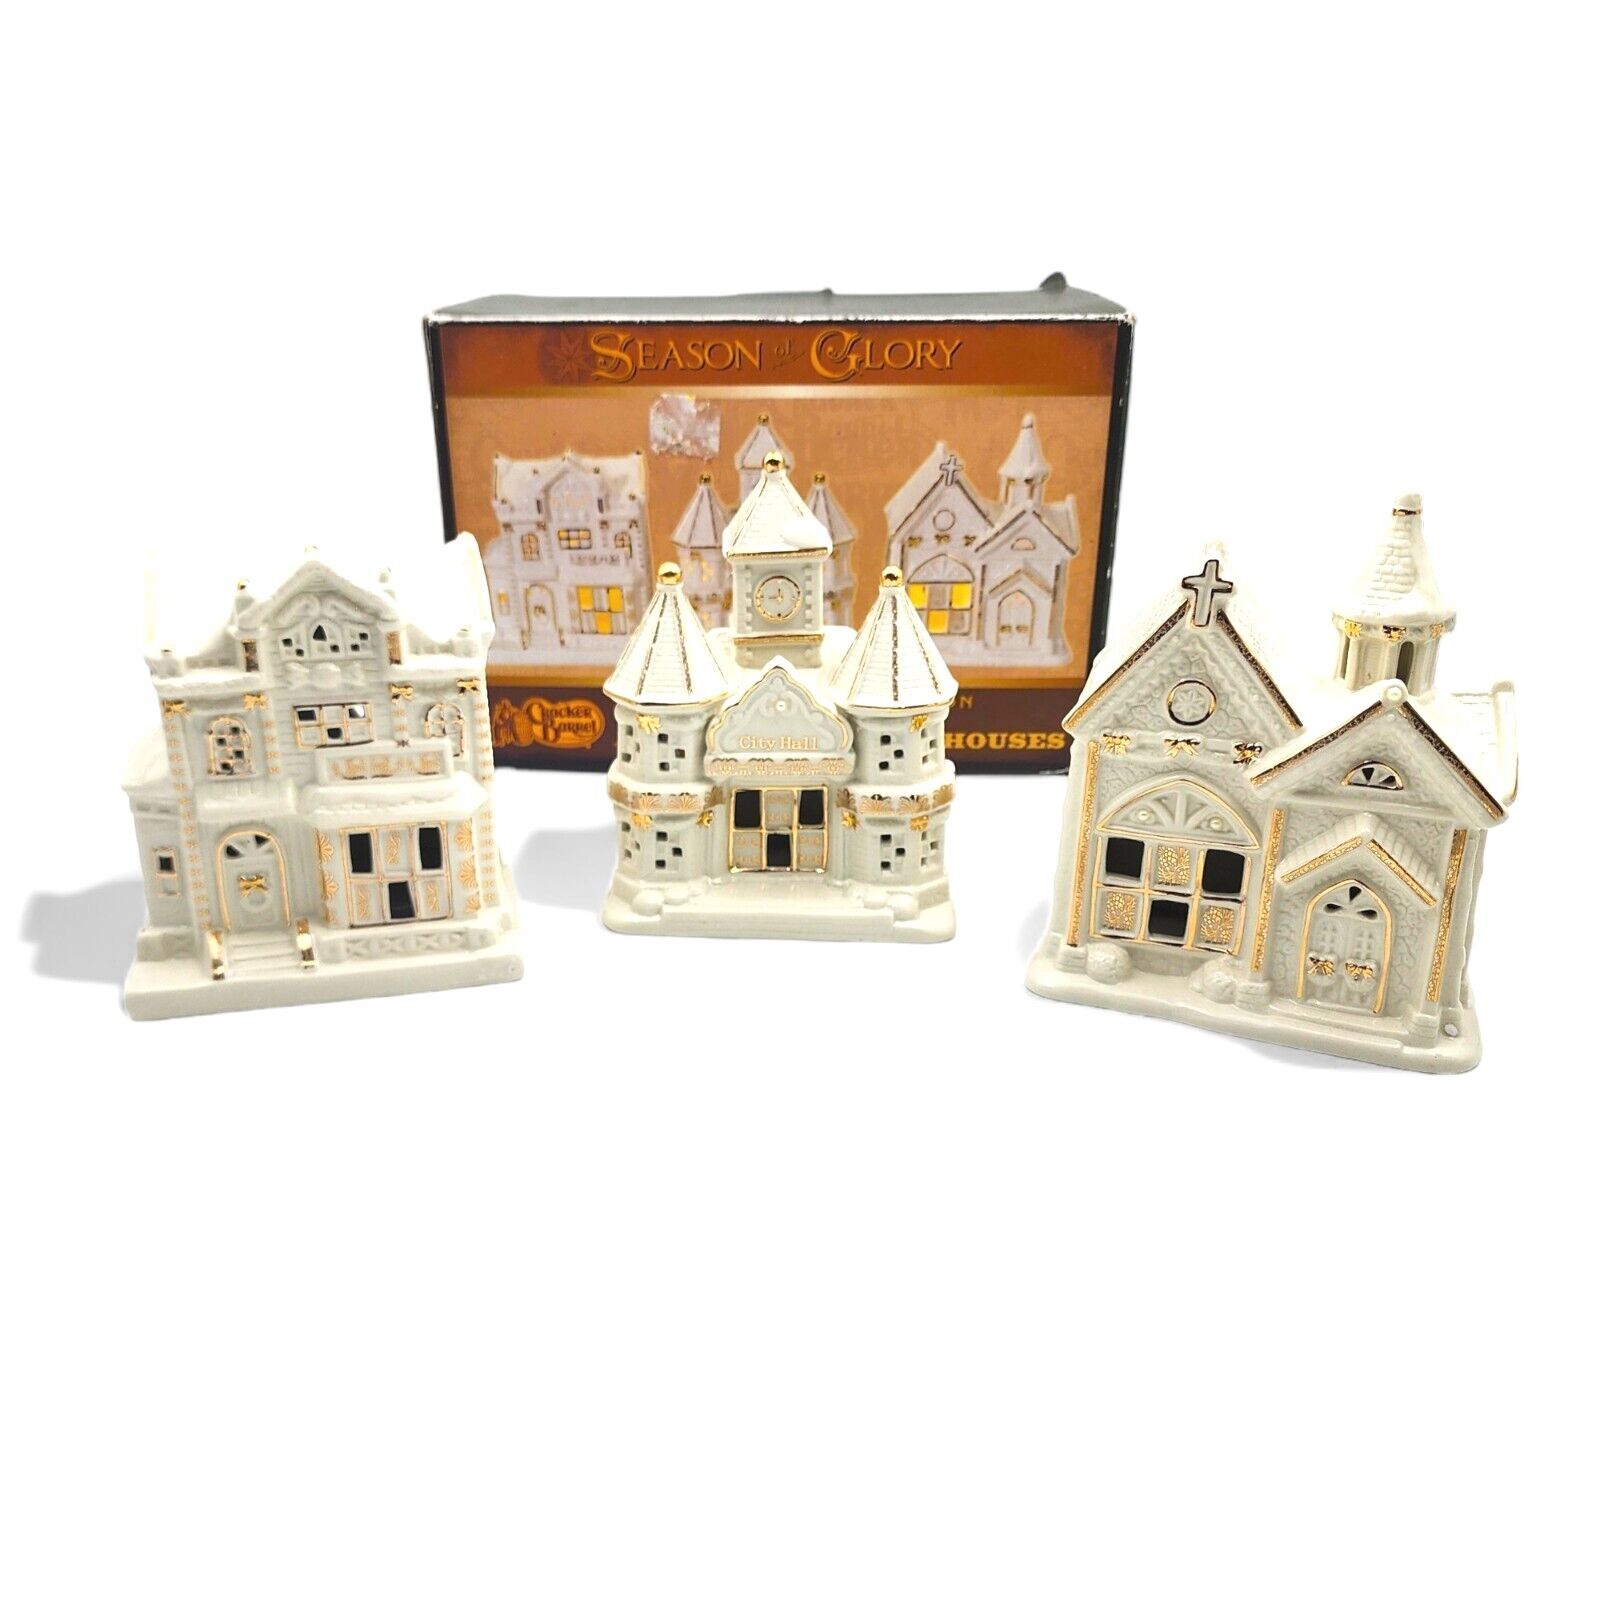 Cracker Barrel Season Of Glory Village Houses With Gold Set Of 3 Lighted 